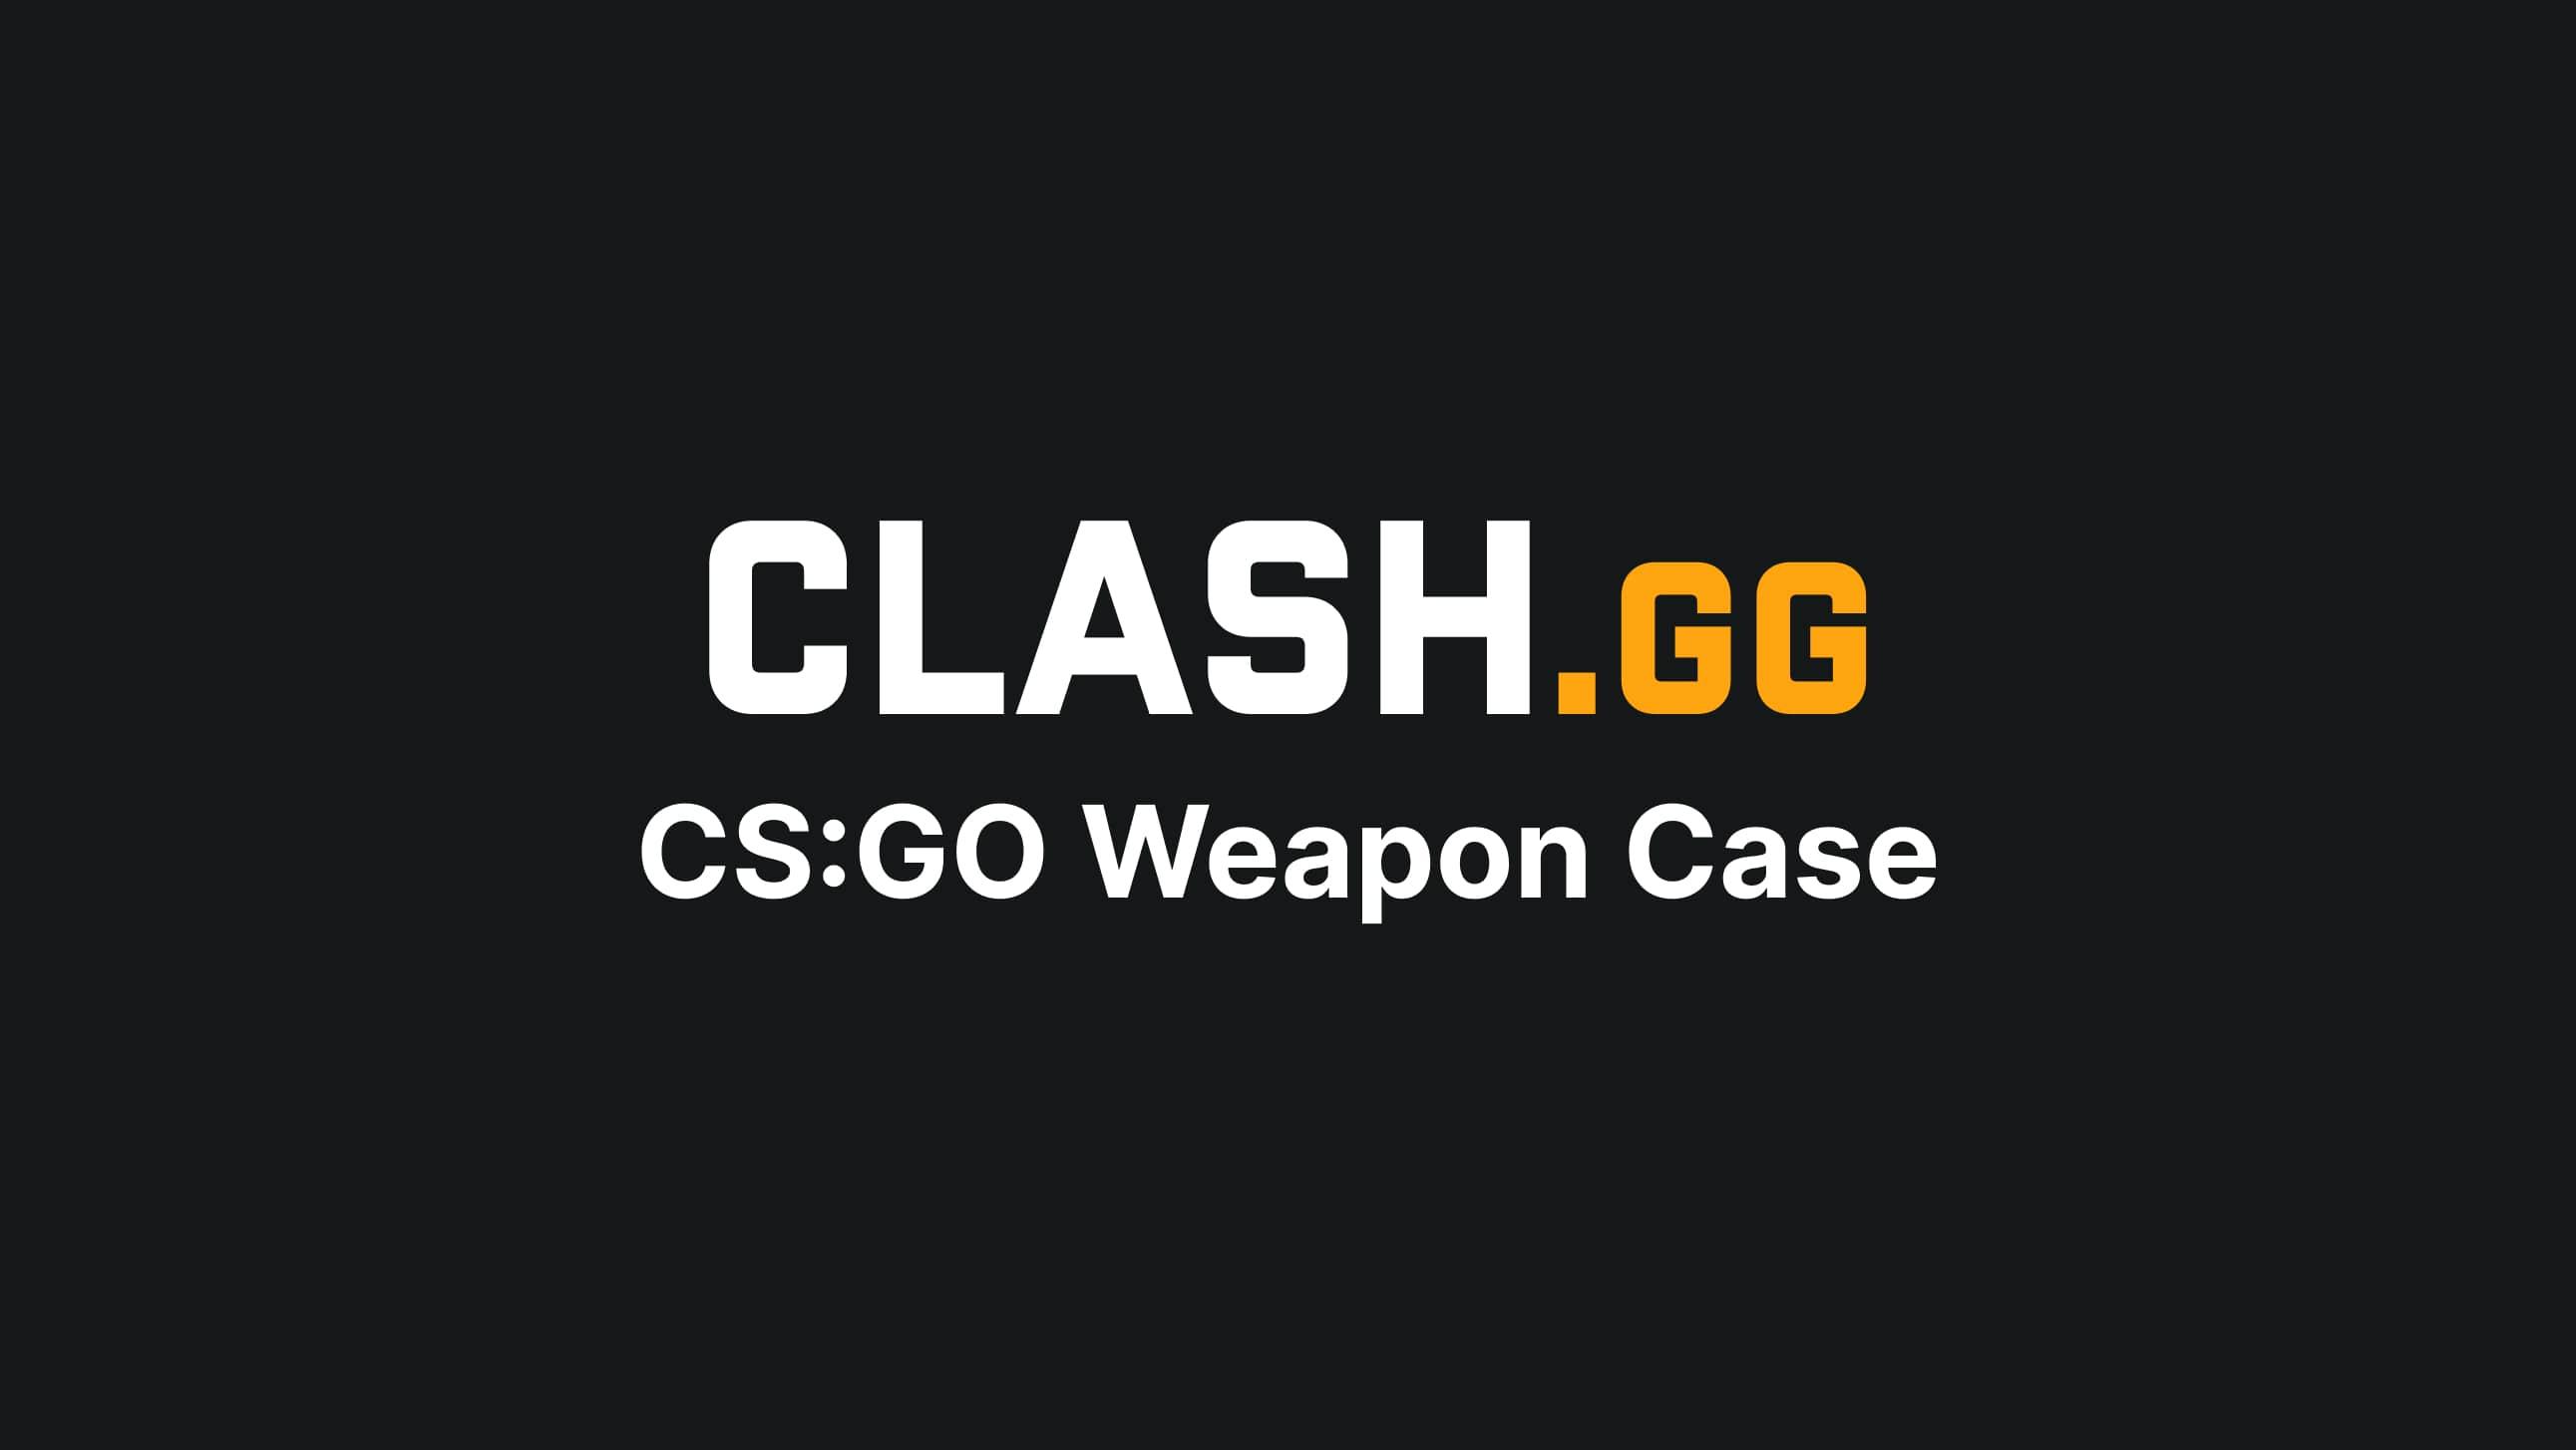 CS:GO Weapon Case Features the CZ75-Auto 3 and is the First Pistol-Only Case